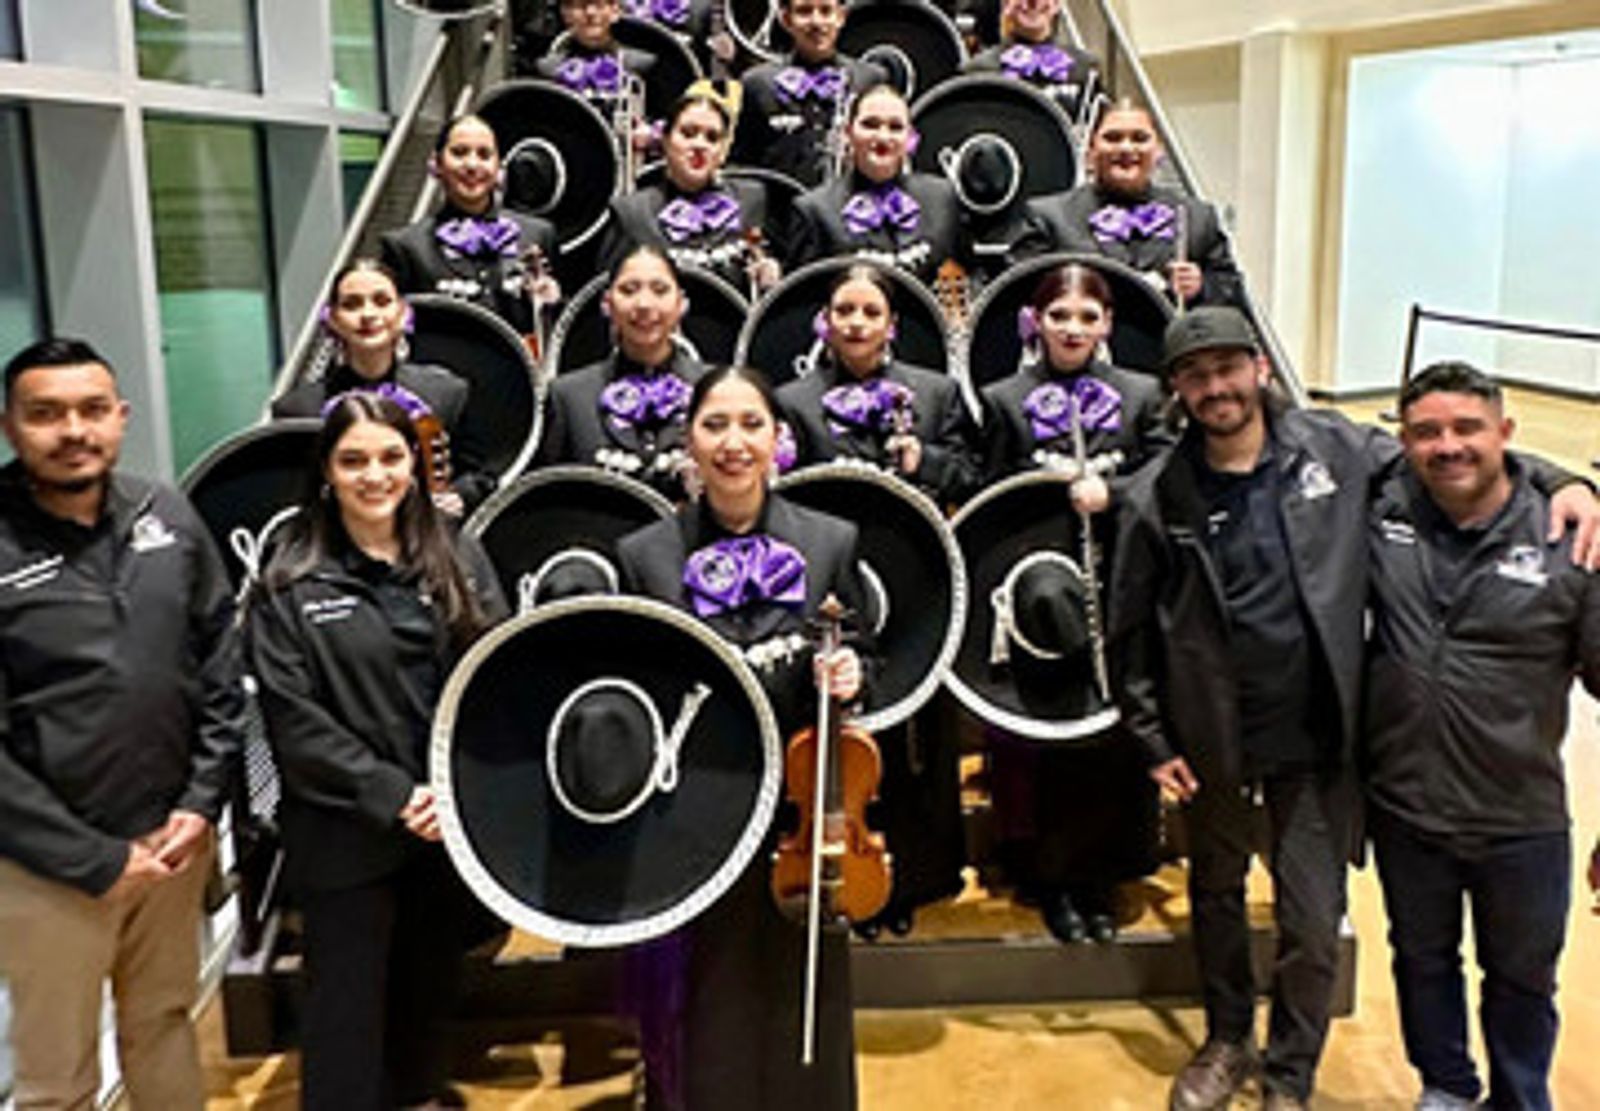 Franklin High School's mariachis to perform with Mexican singer Yuri